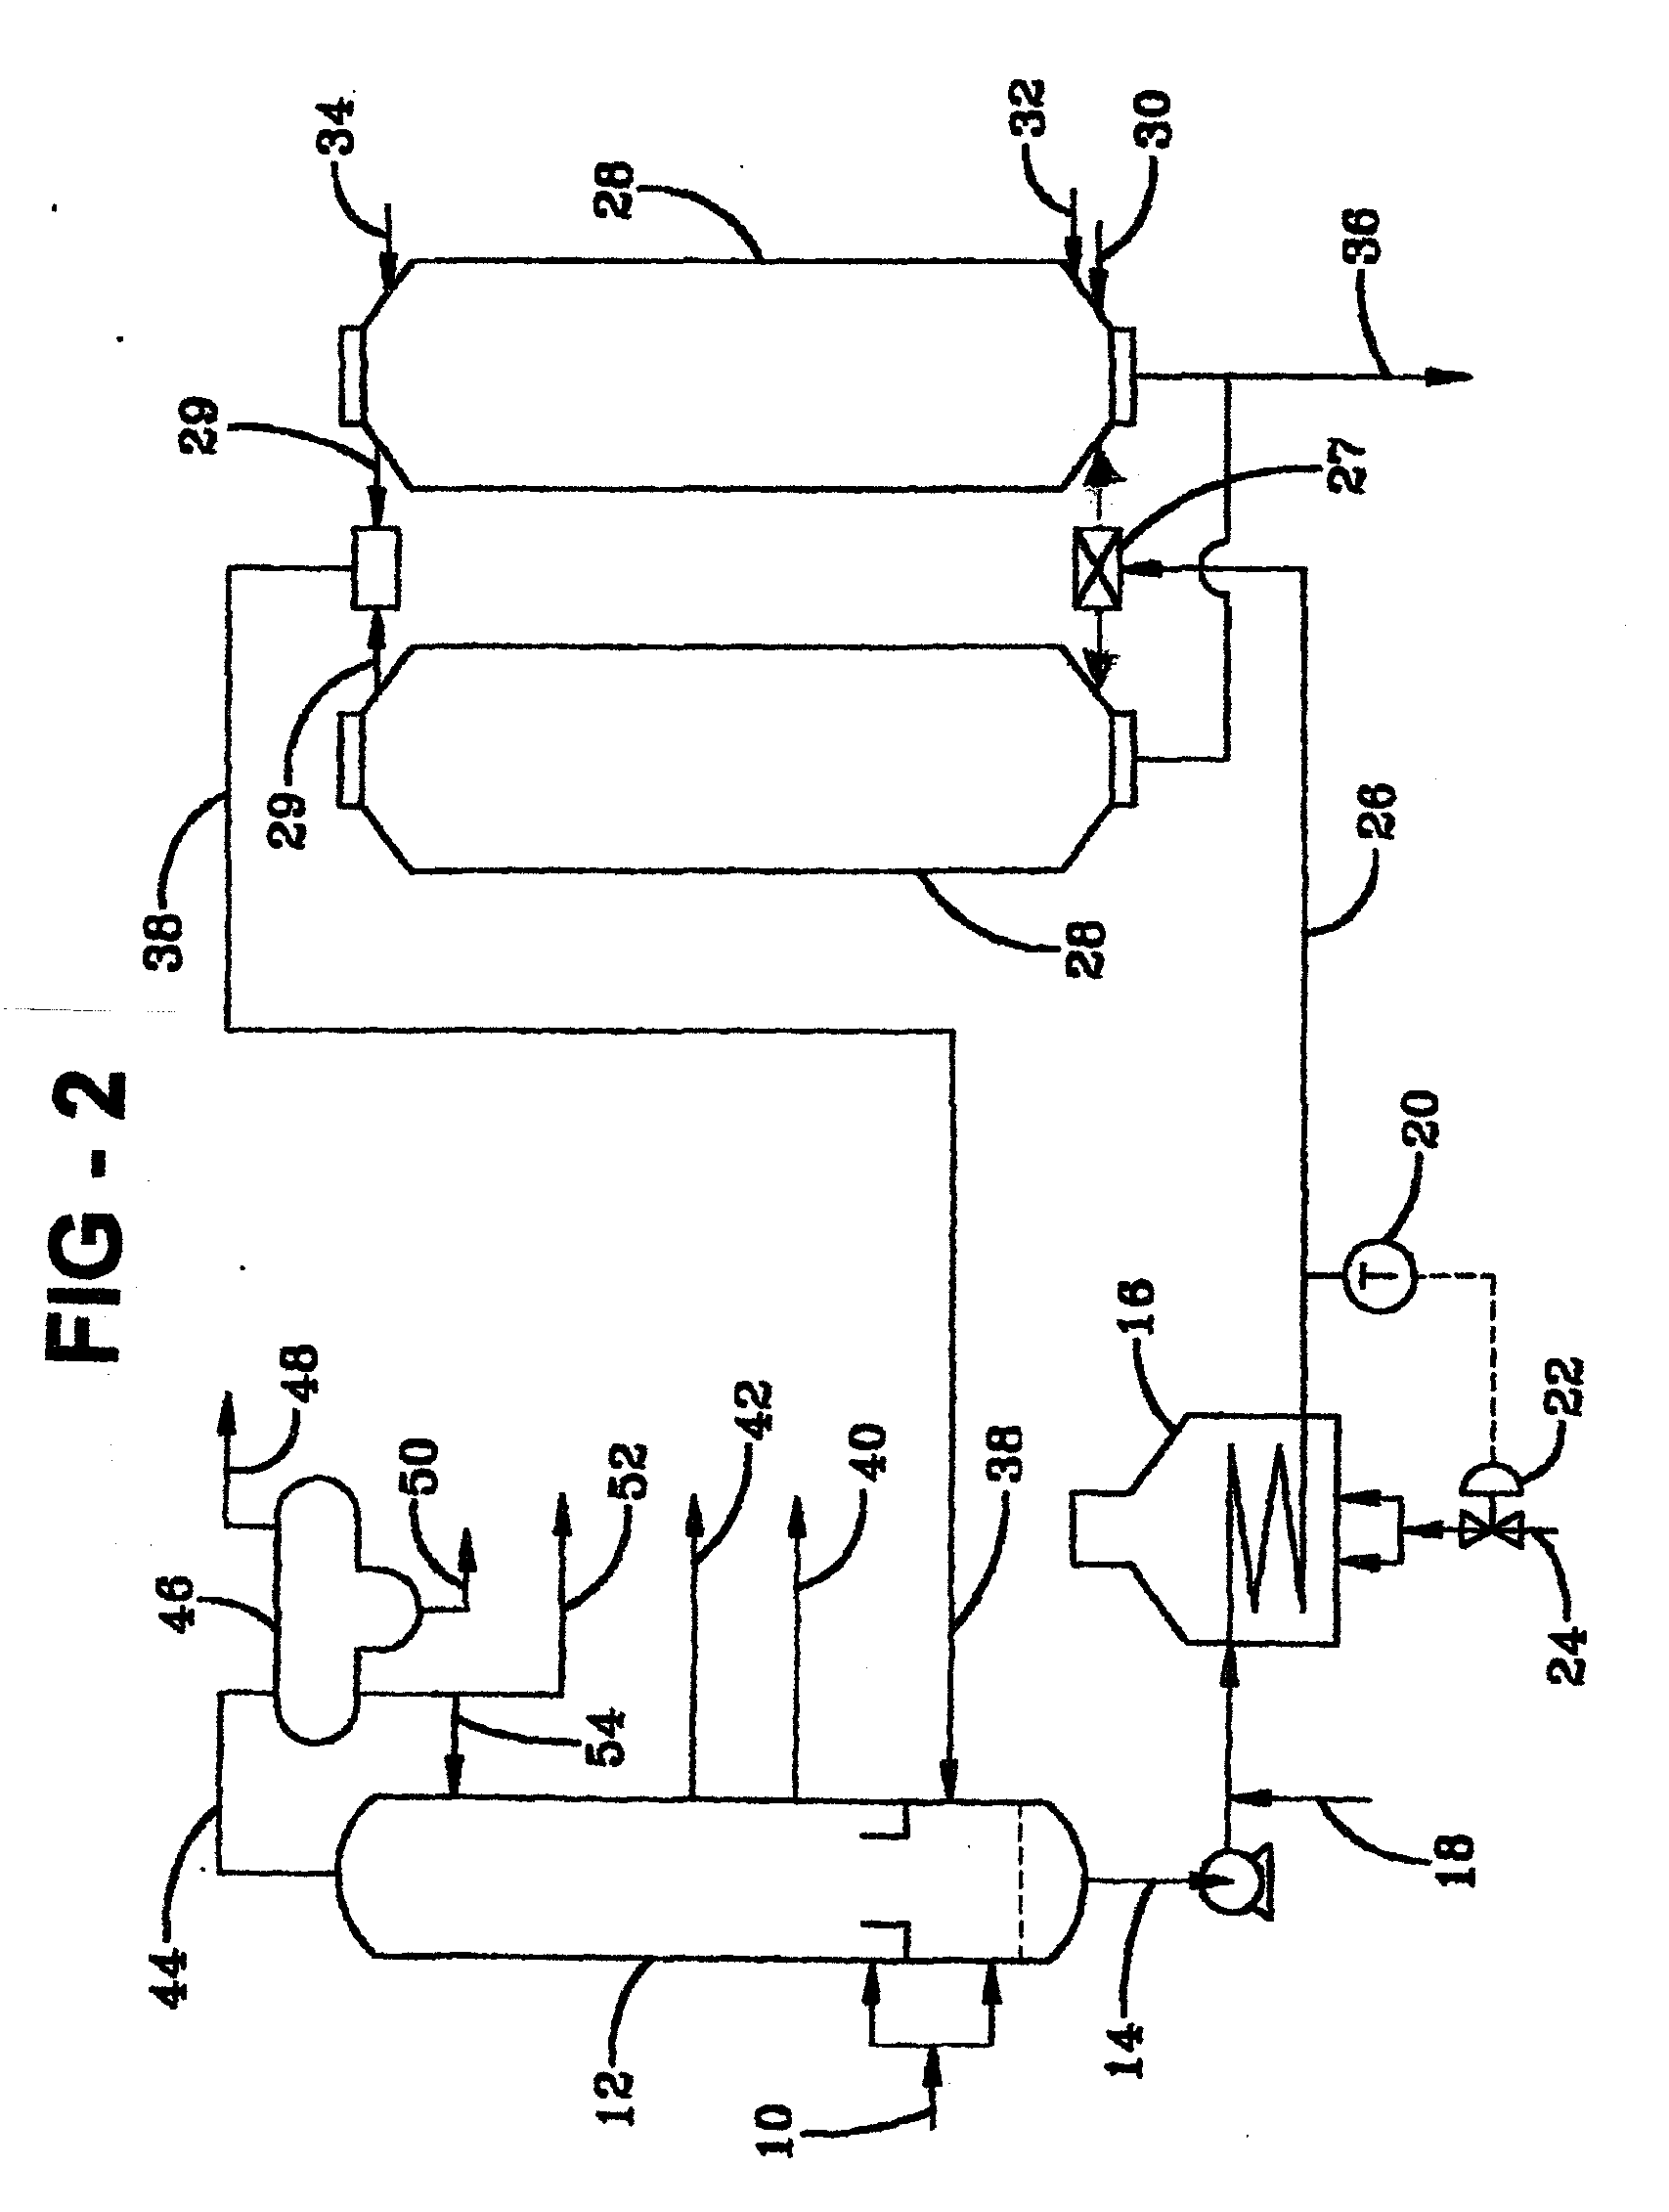 System and Method of Introducing an Additive with a Unique Catalyst to a Coking Process